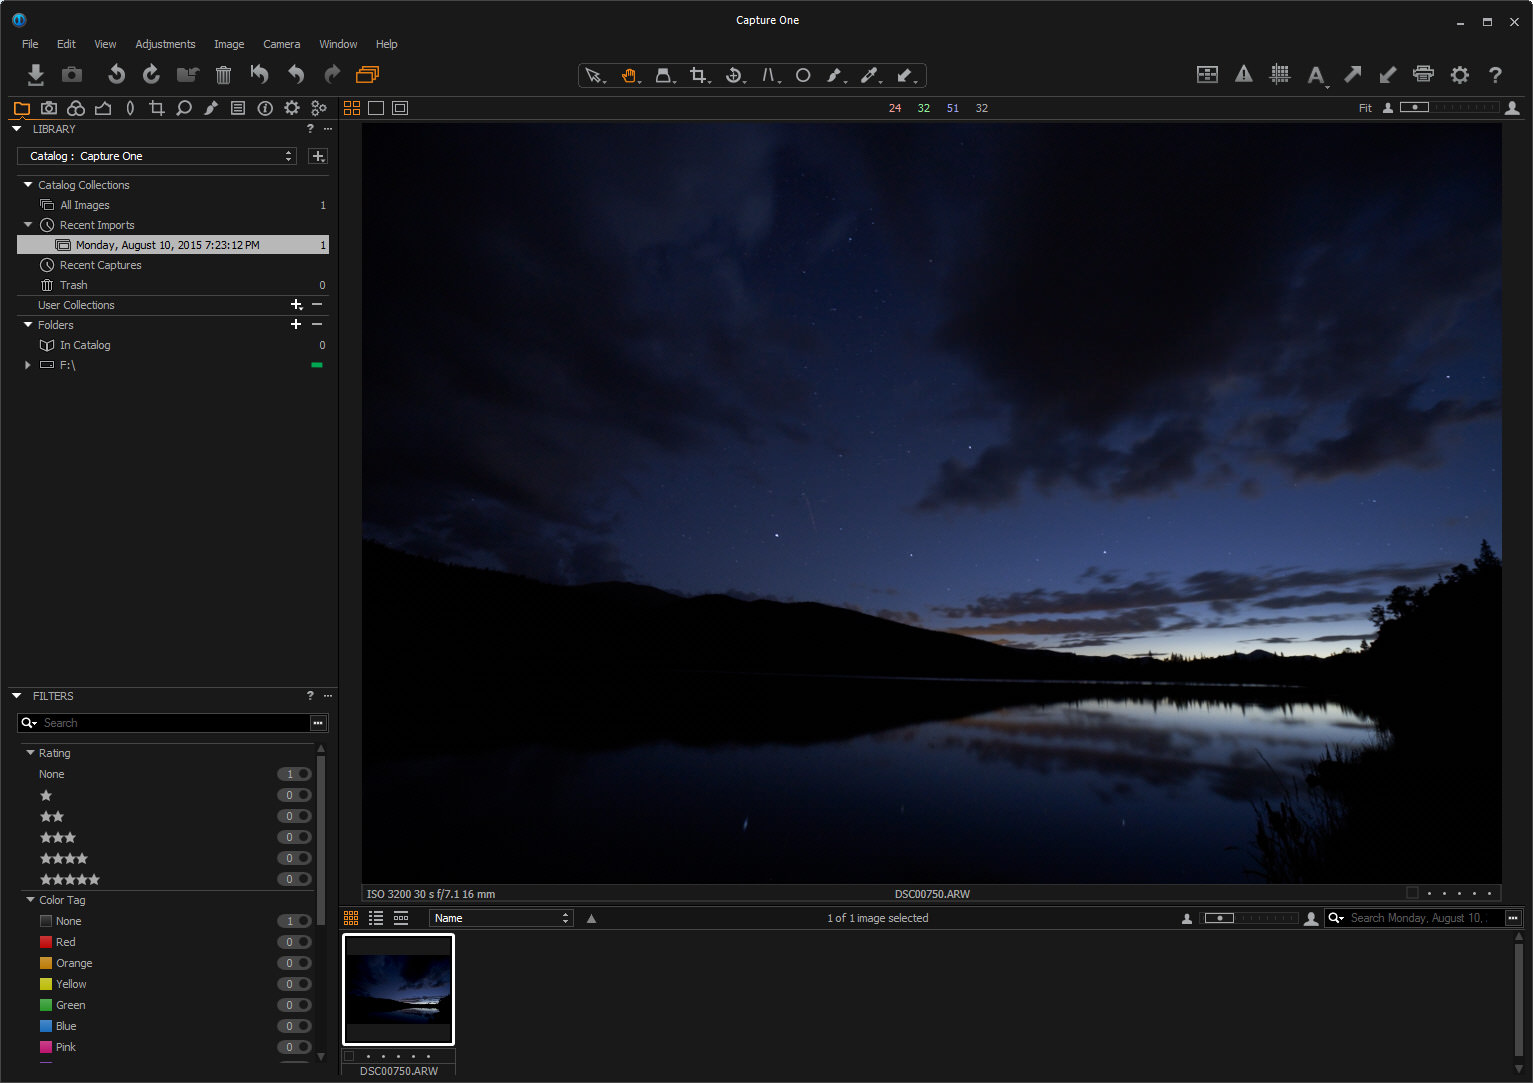 Same image opened up in Capture One 8